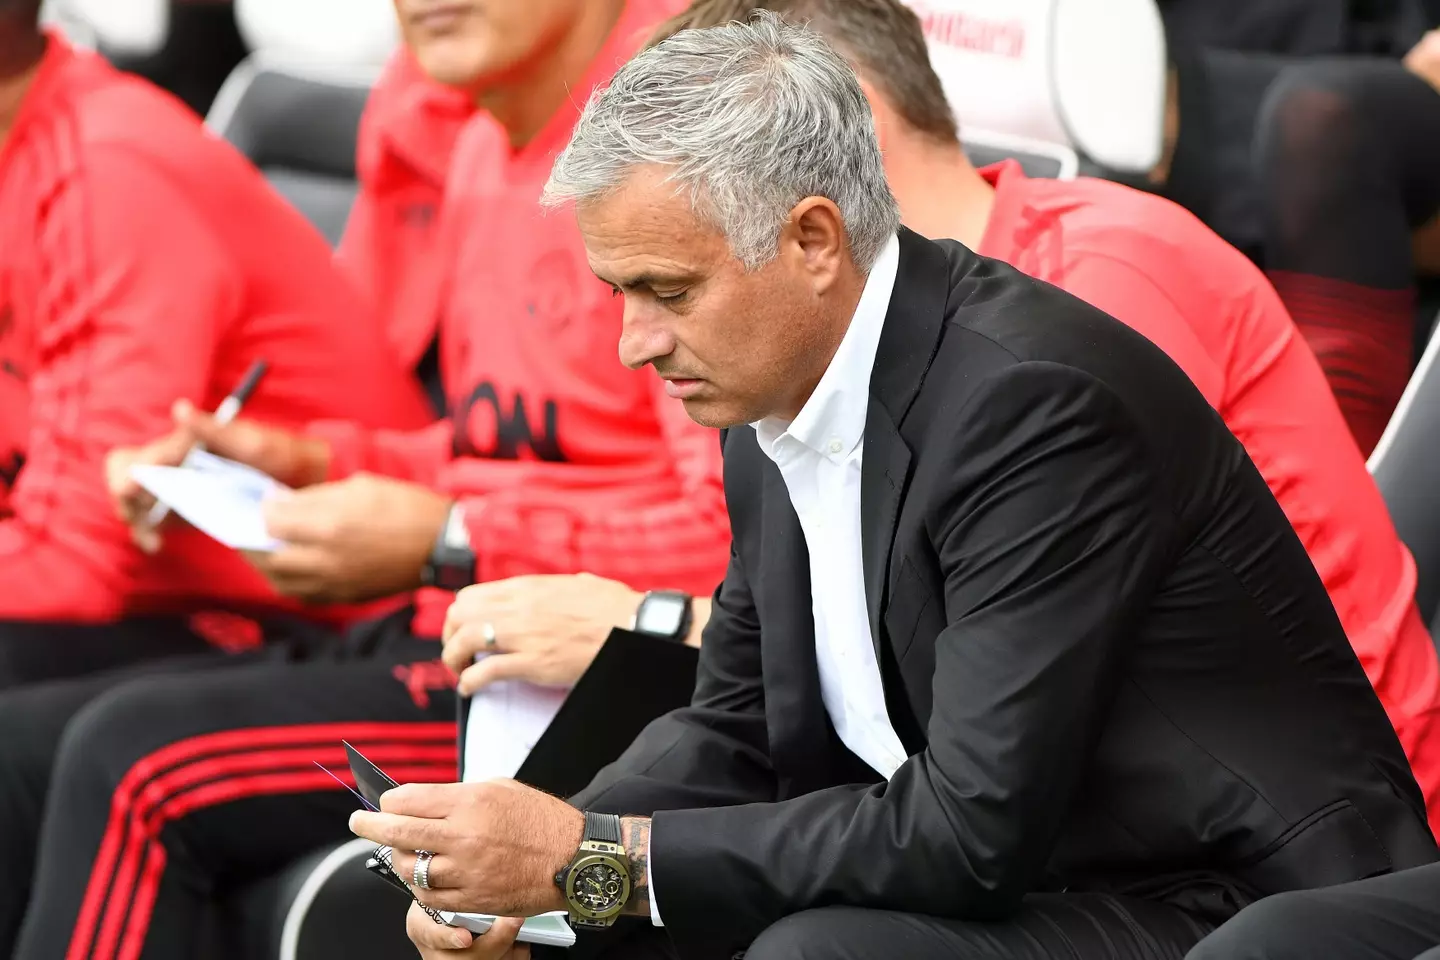 Jose Mourinho famously did not get his primary transfer window targets on multiple occasions. (Alamy)